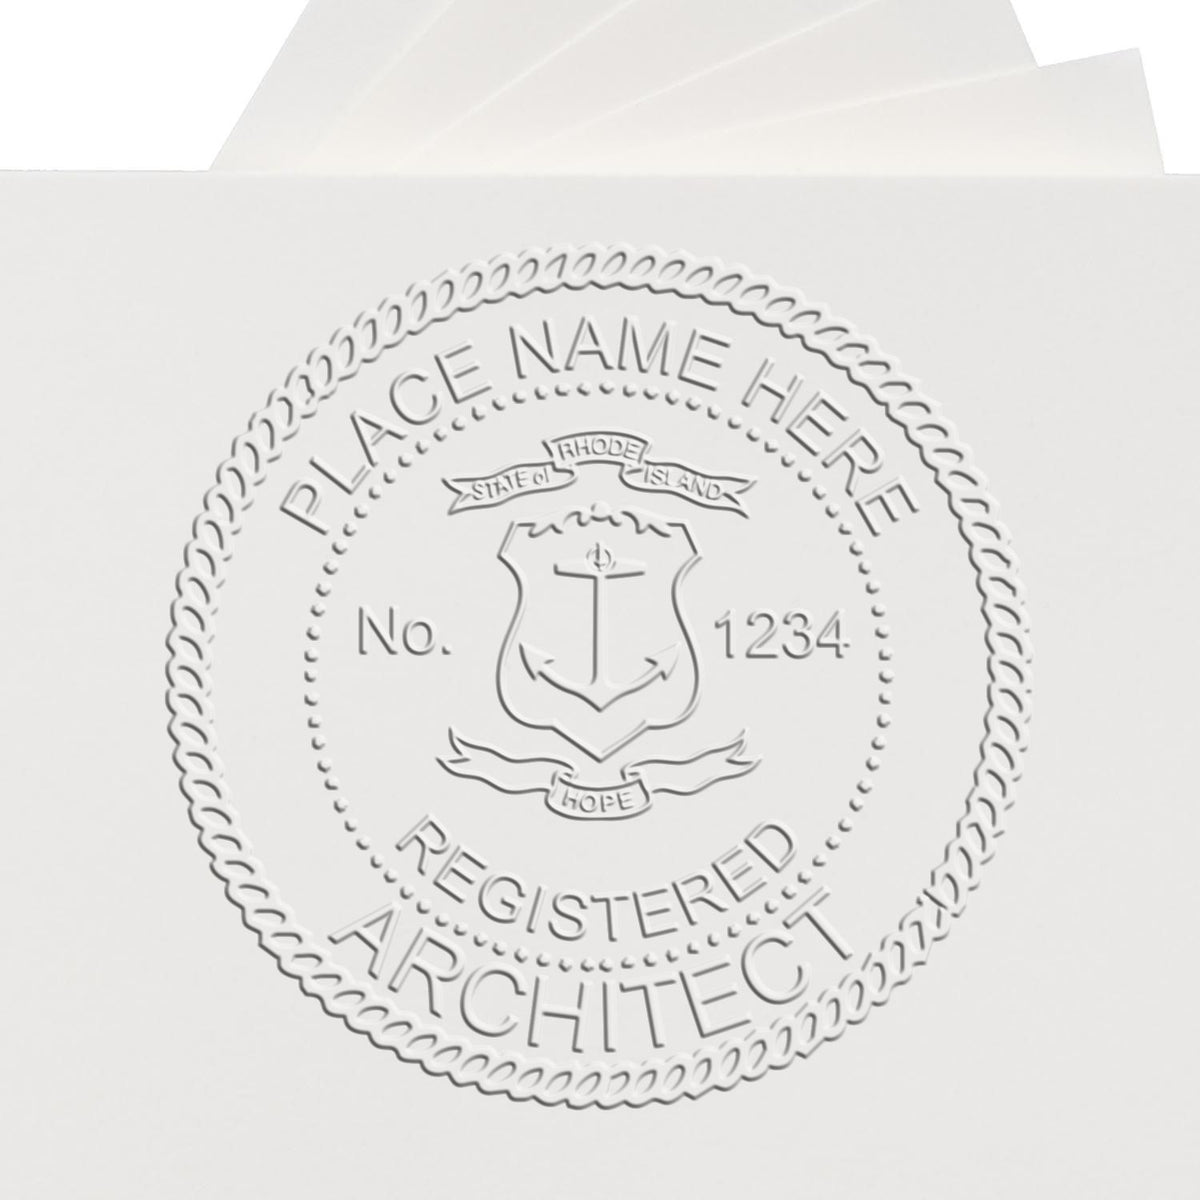 A photograph of the Hybrid Rhode Island Architect Seal stamp impression reveals a vivid, professional image of the on paper.